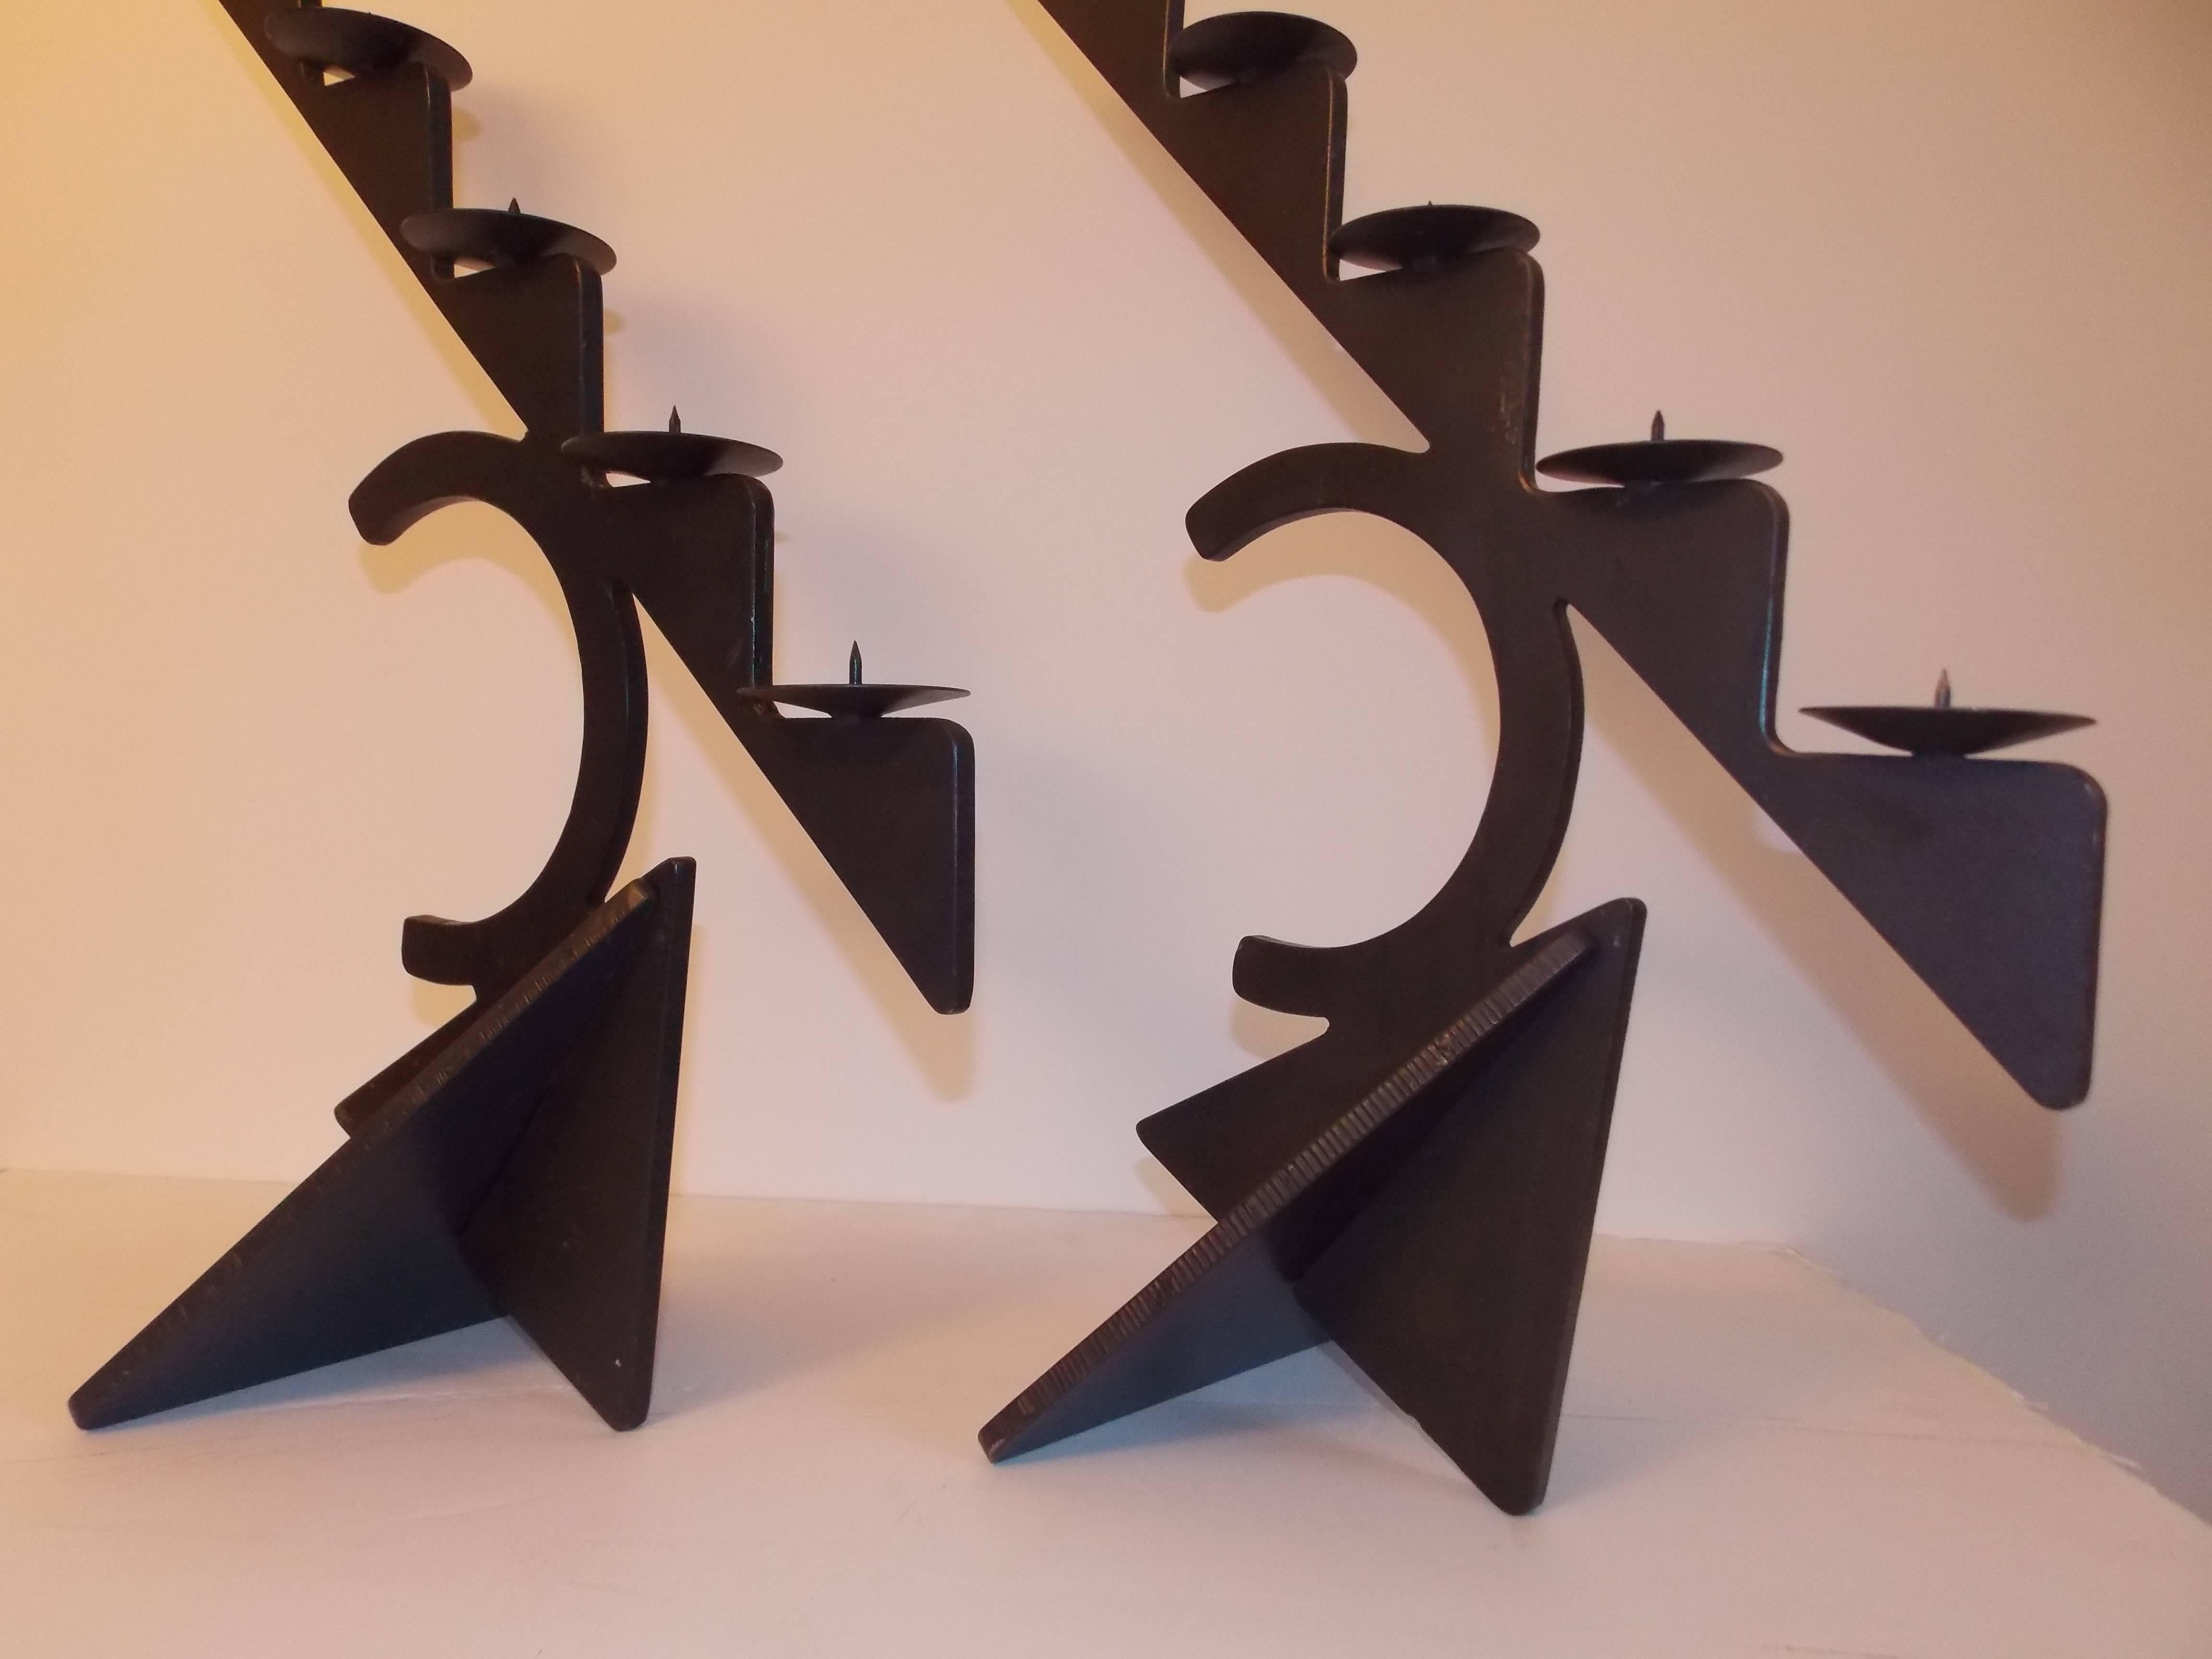 1947-2013.
A fun pair of postmodern designs.
Made of hand-forged steel.
These are great to display on a large dining table indoors or out.
They're in great vintage condition.
Both are stamped with the name.